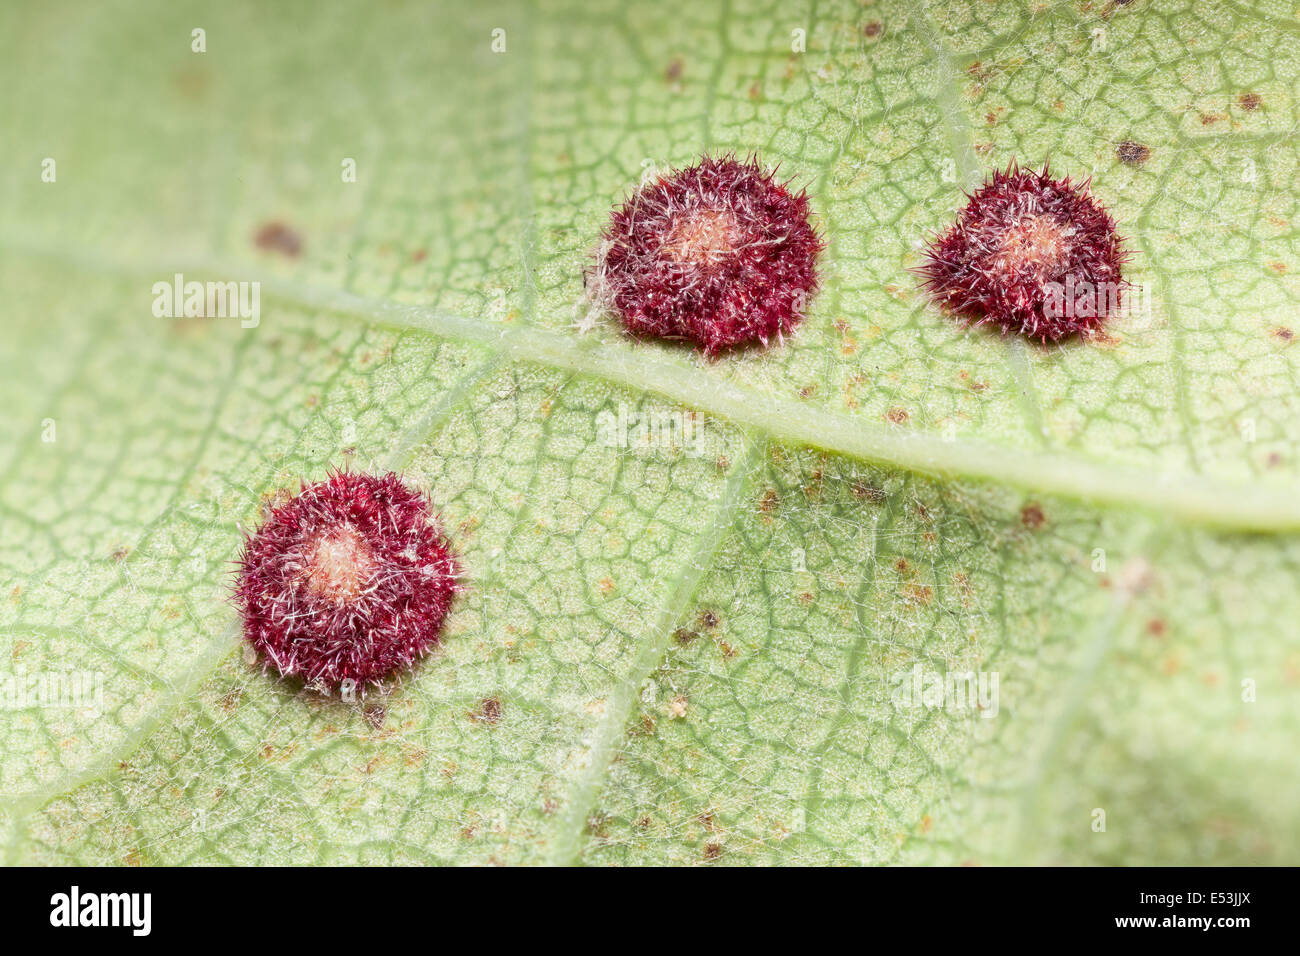 Spangle galls on Oak, possibly common spangle calls, caused by the cynipid wasp Neuroterus quercusbaccarum Stock Photo